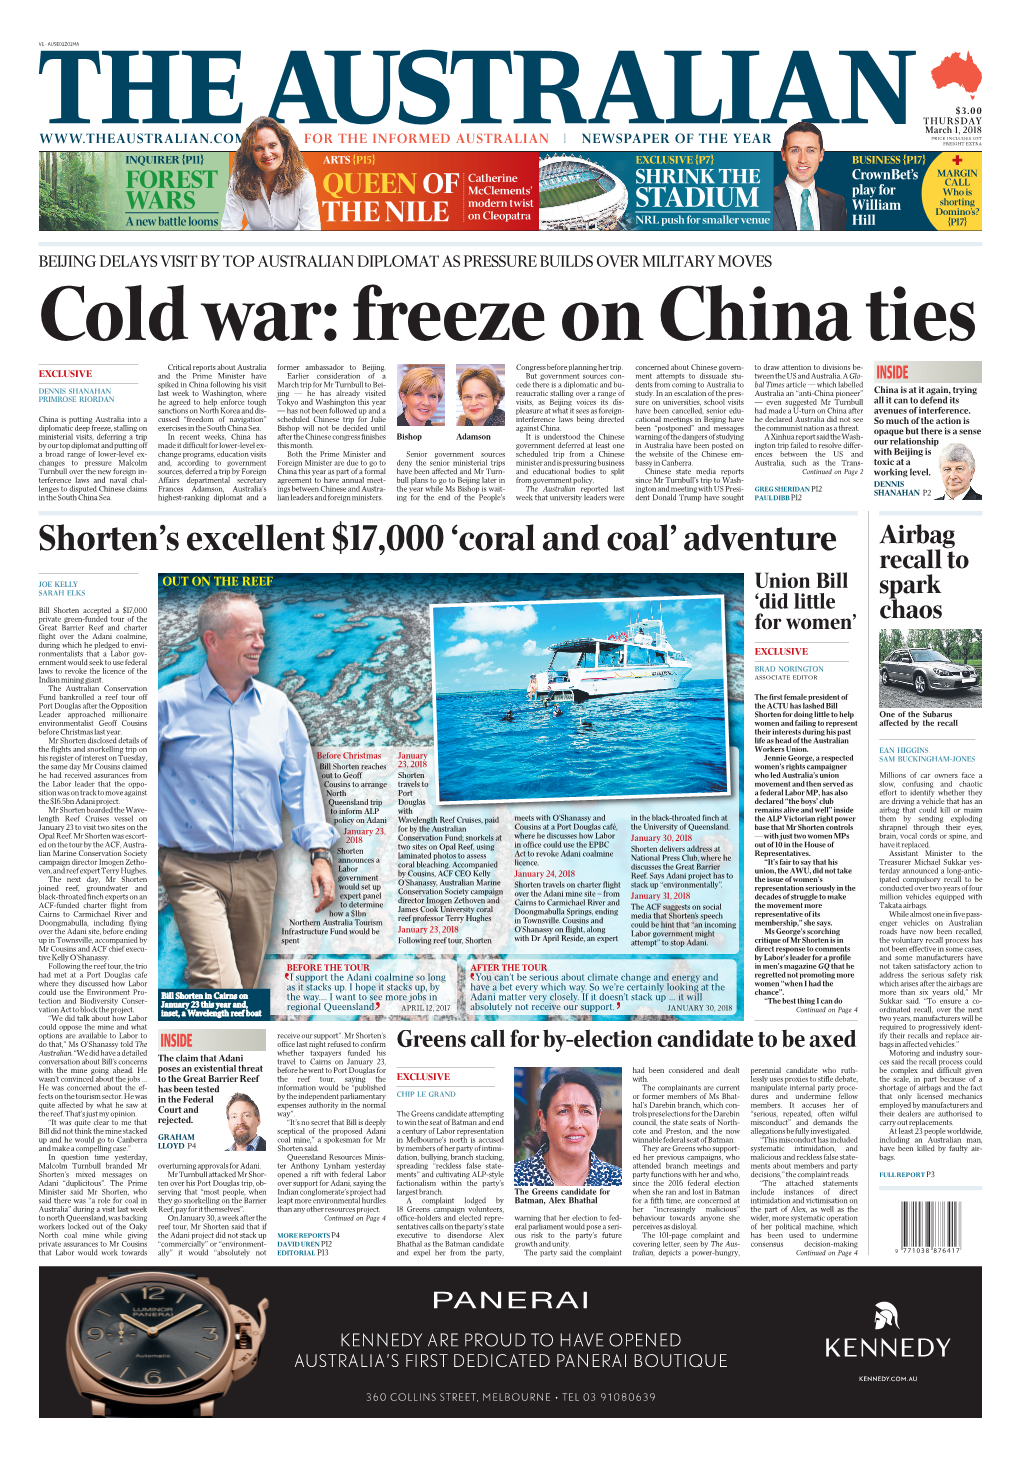 Coral and Coal’ Adventure Airbag Recall to JOE KELLY out on the REEF Union Bill SARAH ELKS Spark